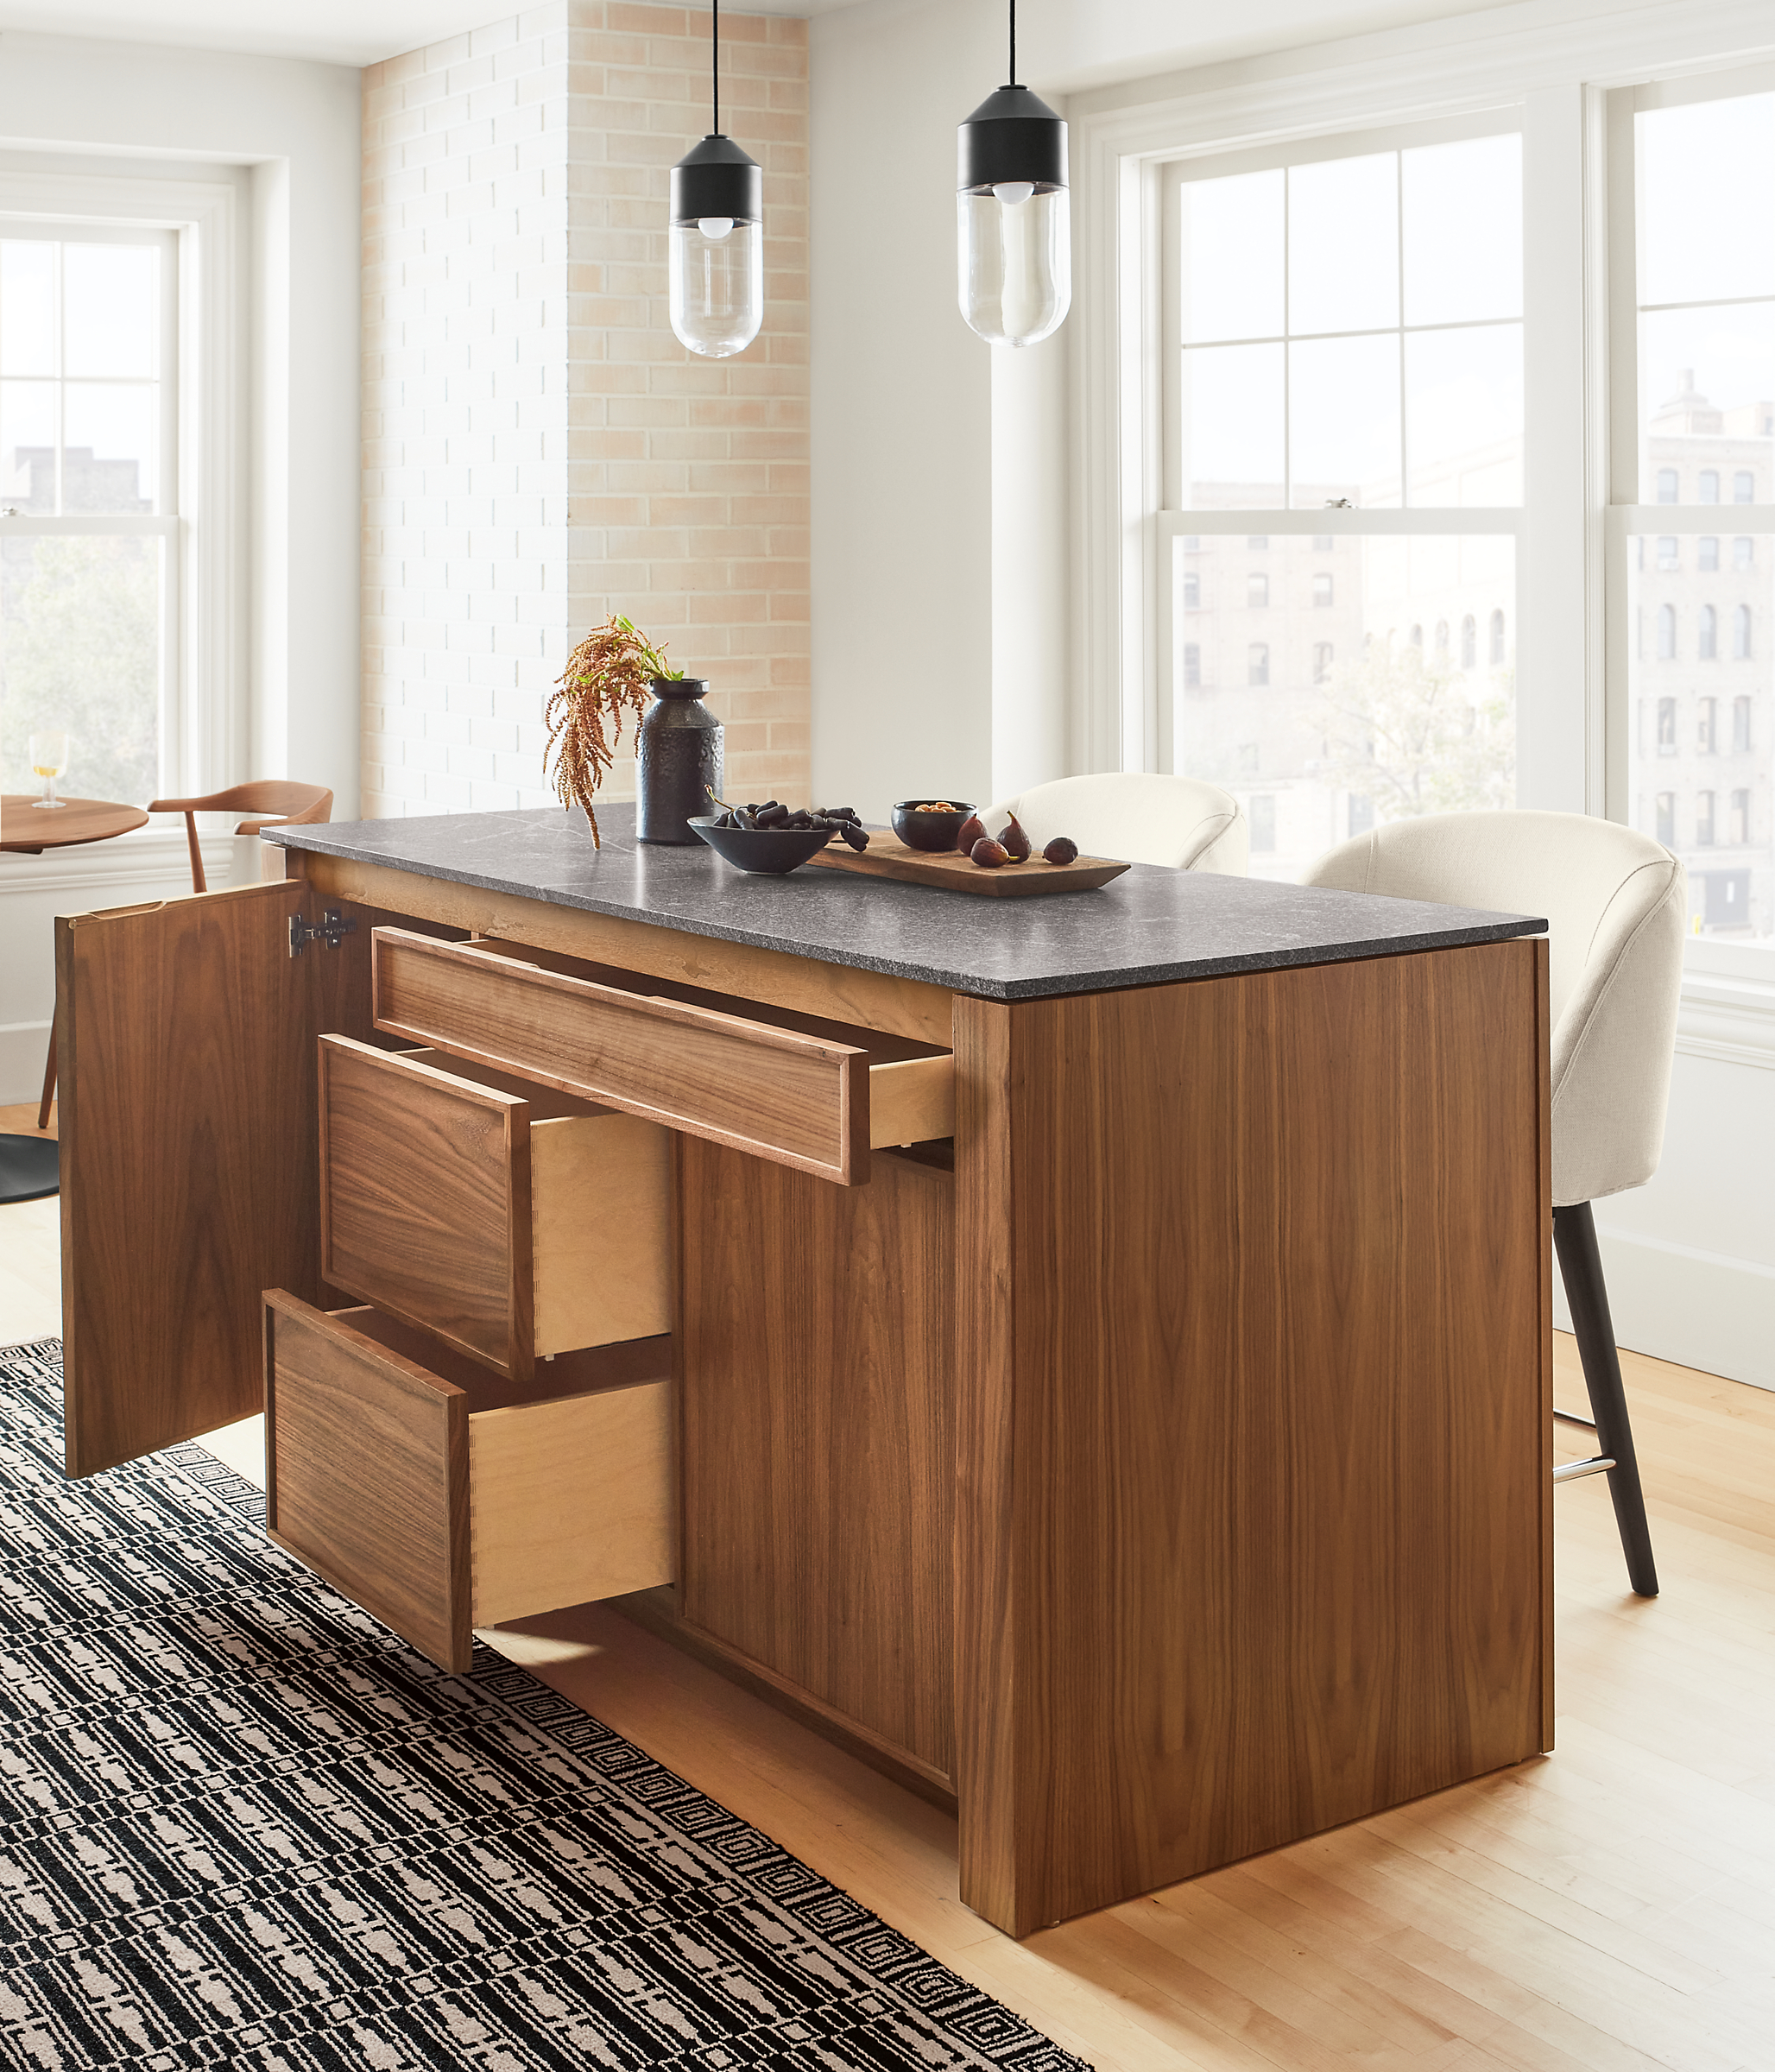 Detail of Amherst 60-wide Kitchen Island in walnut with doors and drawers open.